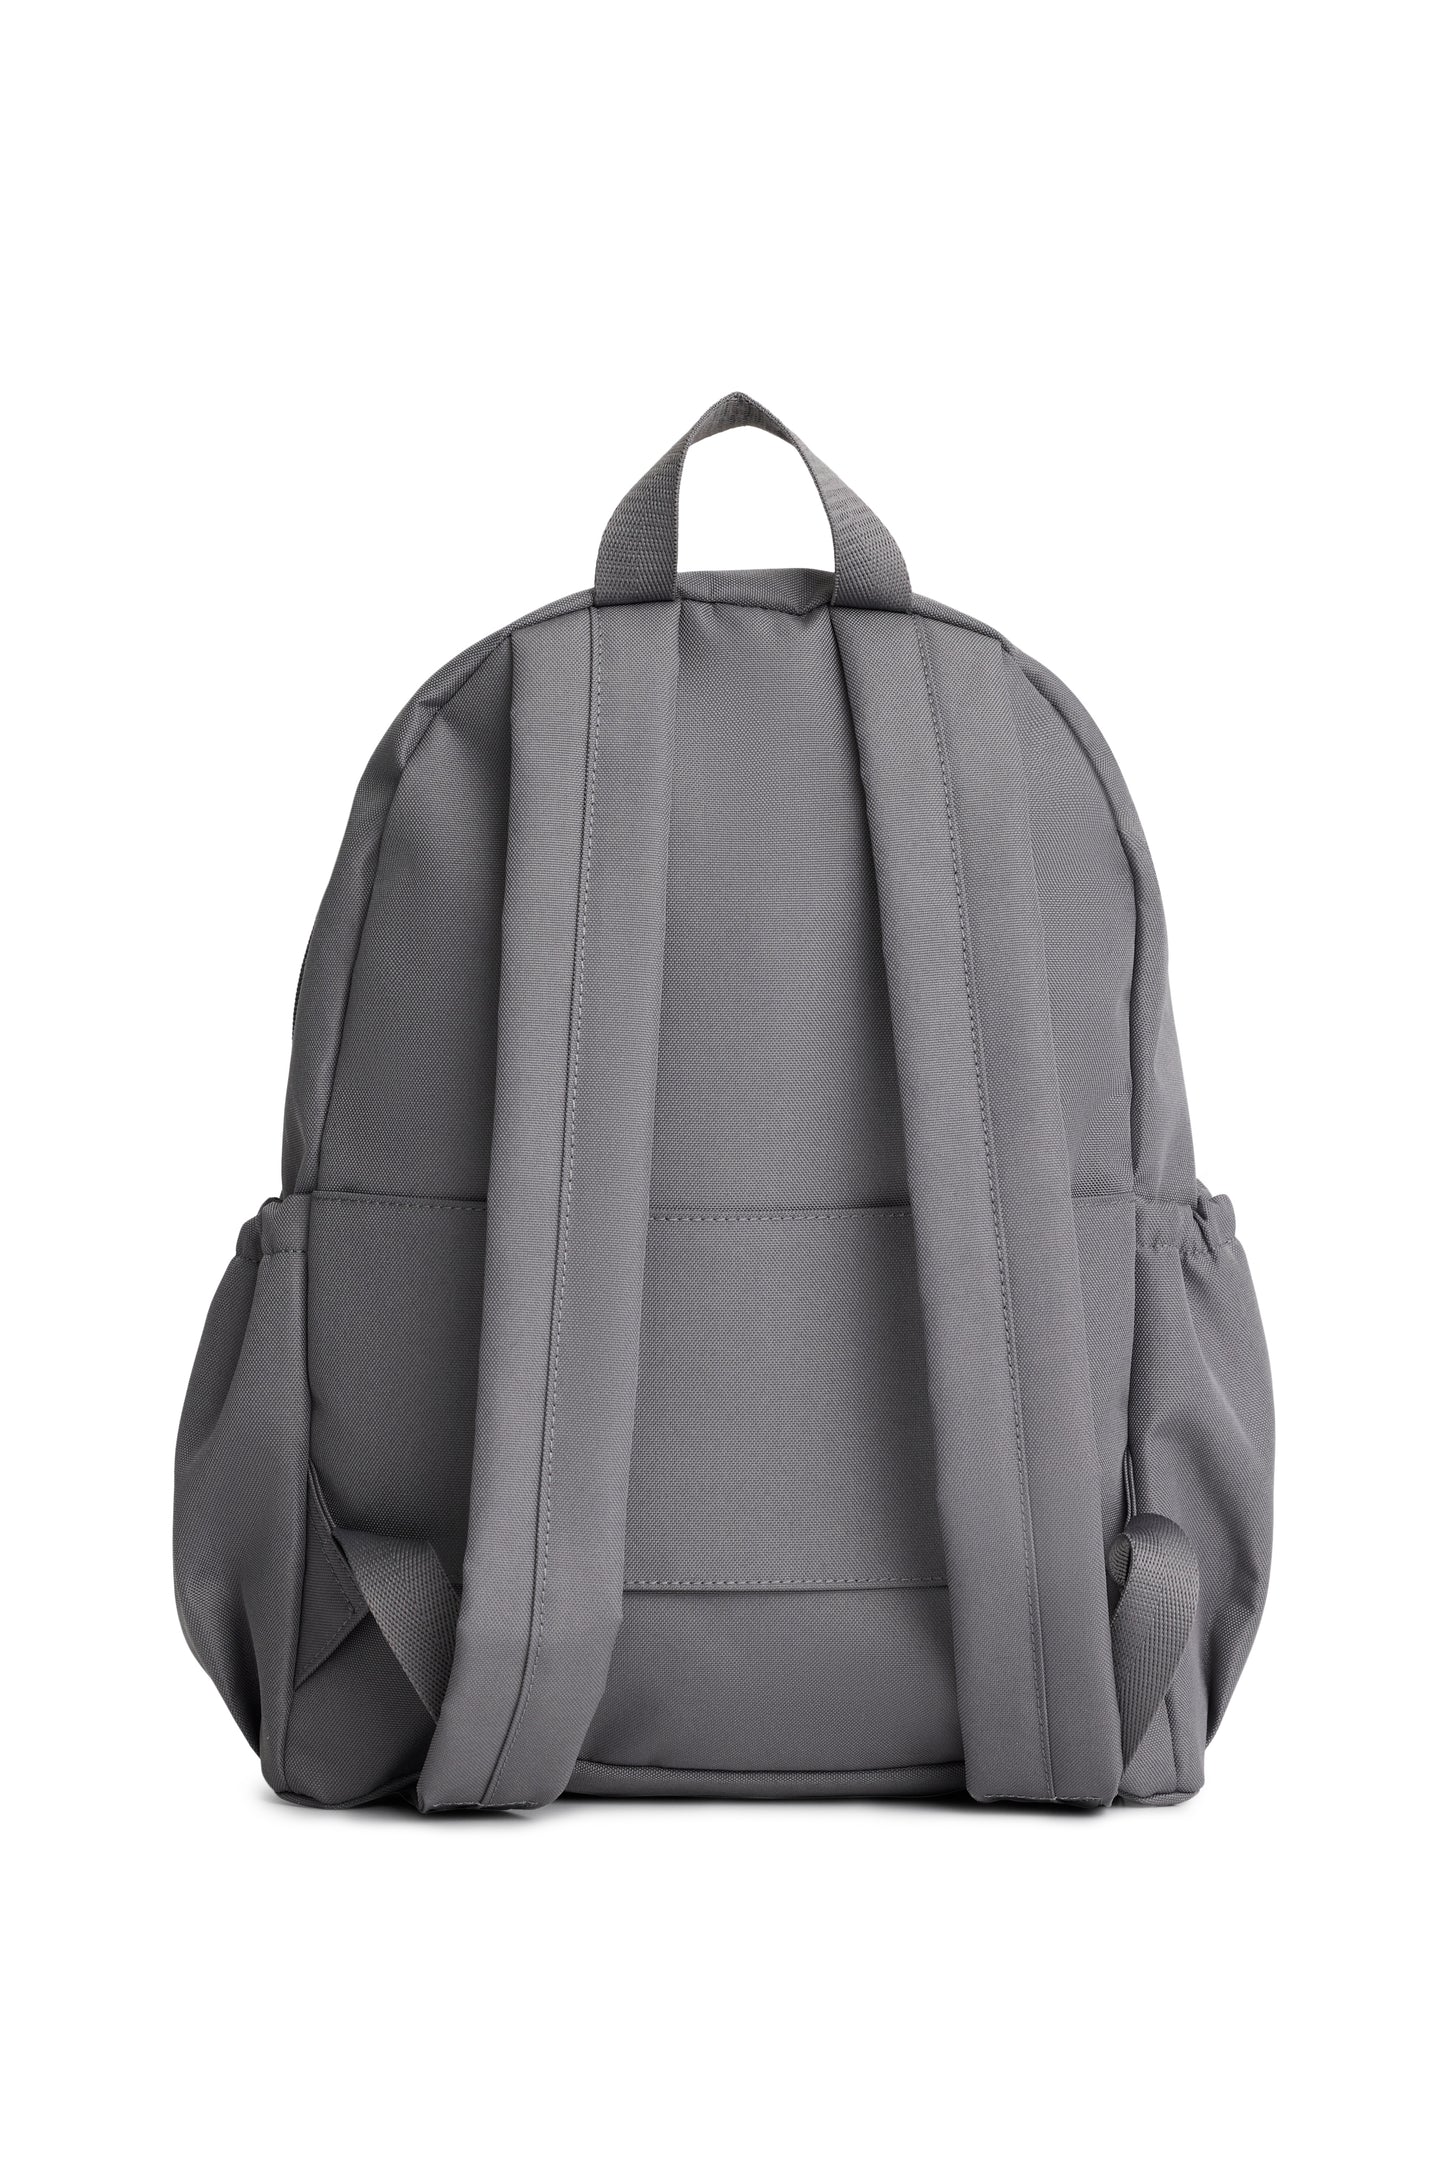 The BÉISics Backpack in Grey